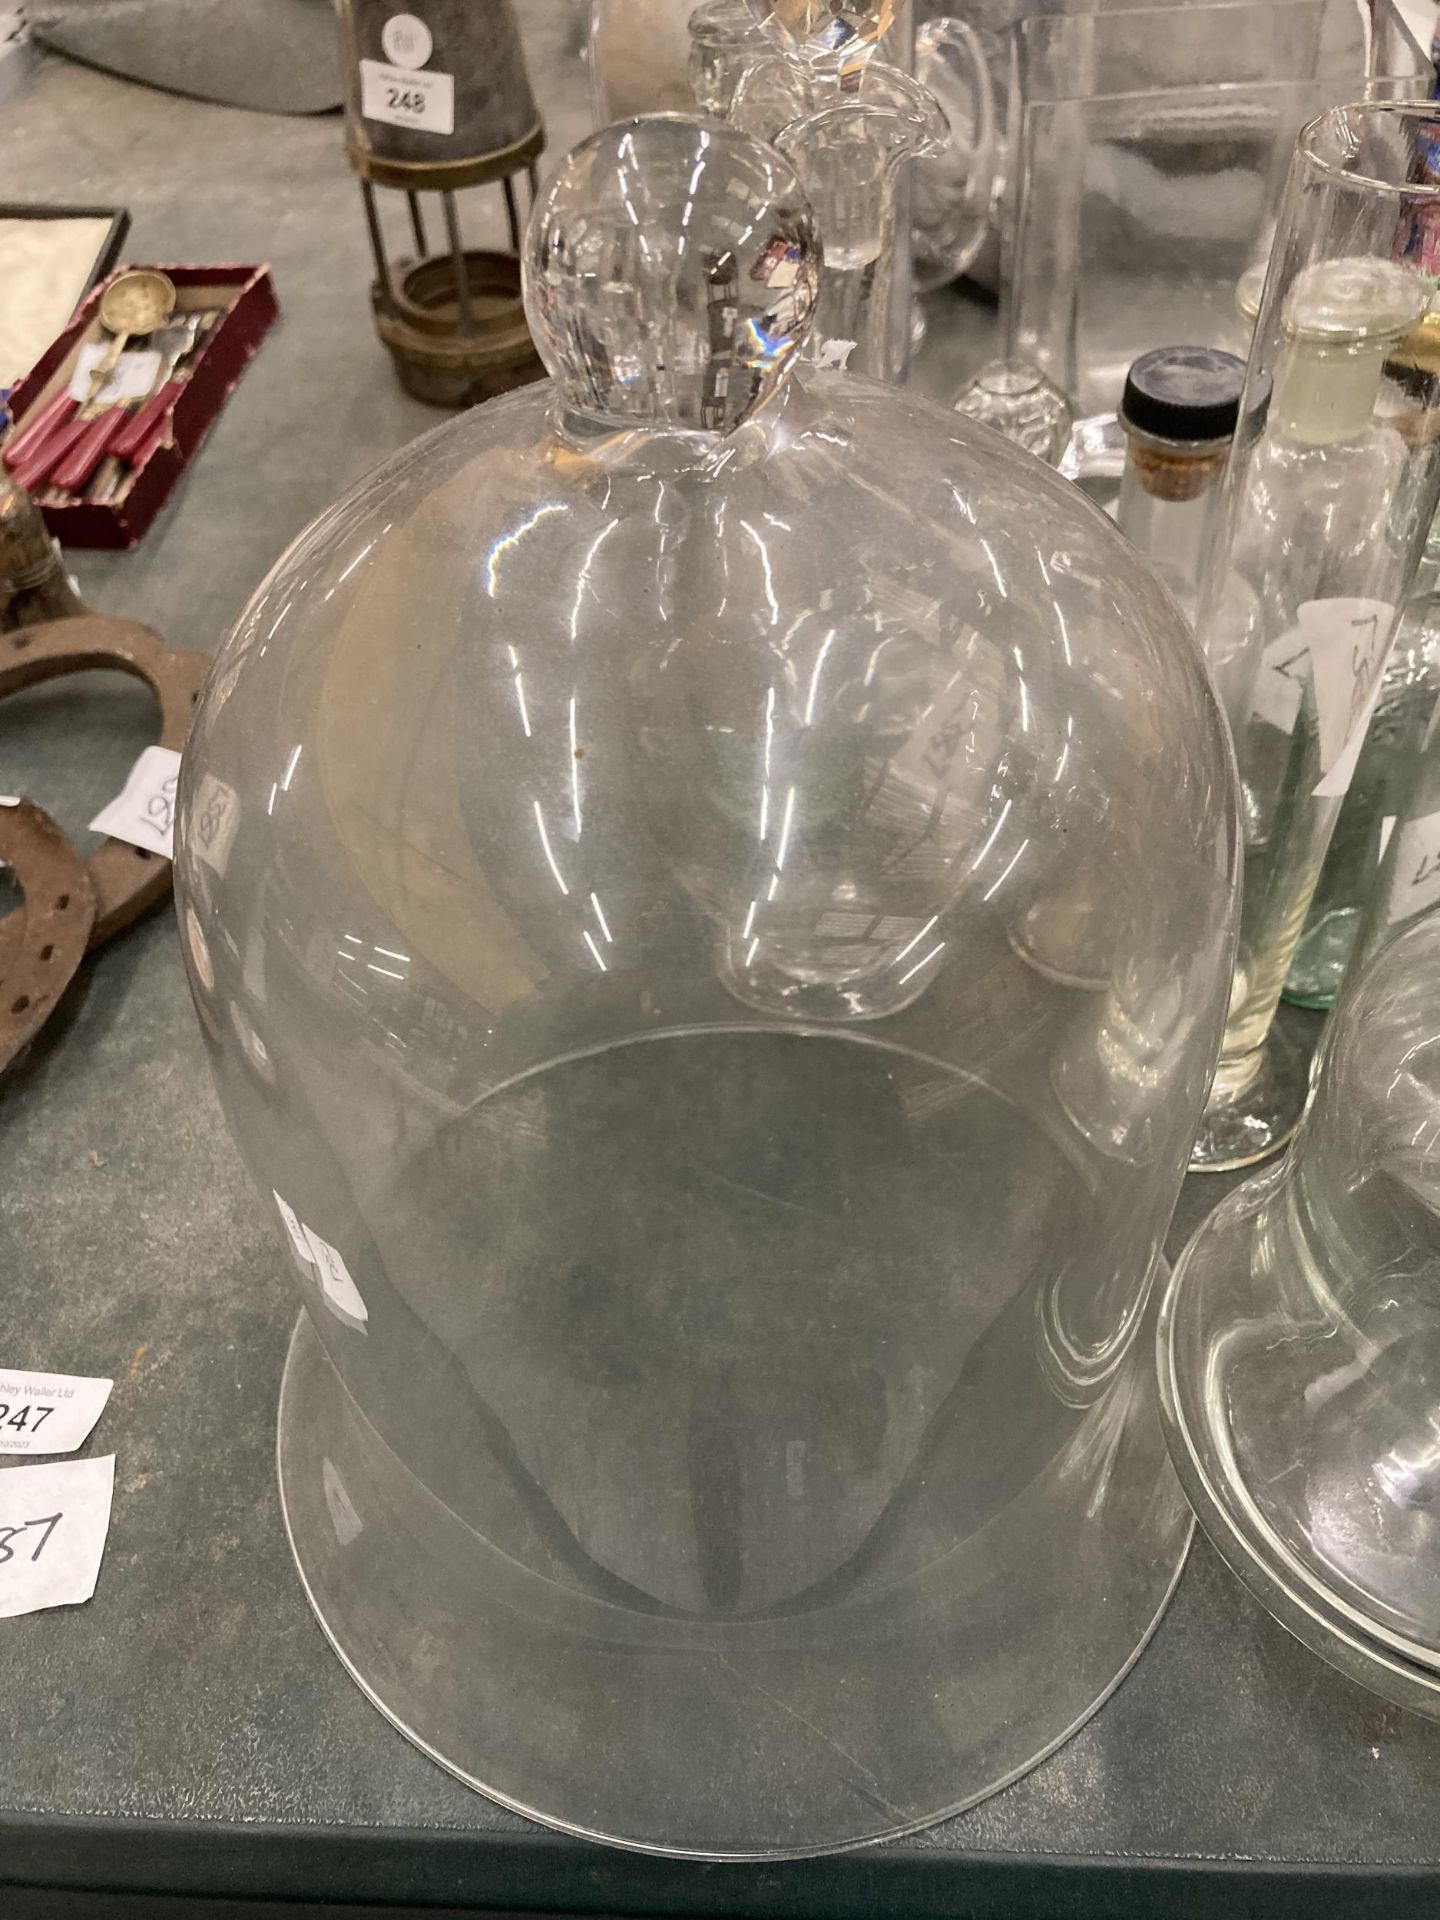 A COLLECTION OF GLASS ITEMS TO INCLUDE CLOCHE DOME, DECANTER, BOTTLES ETC - Image 2 of 4